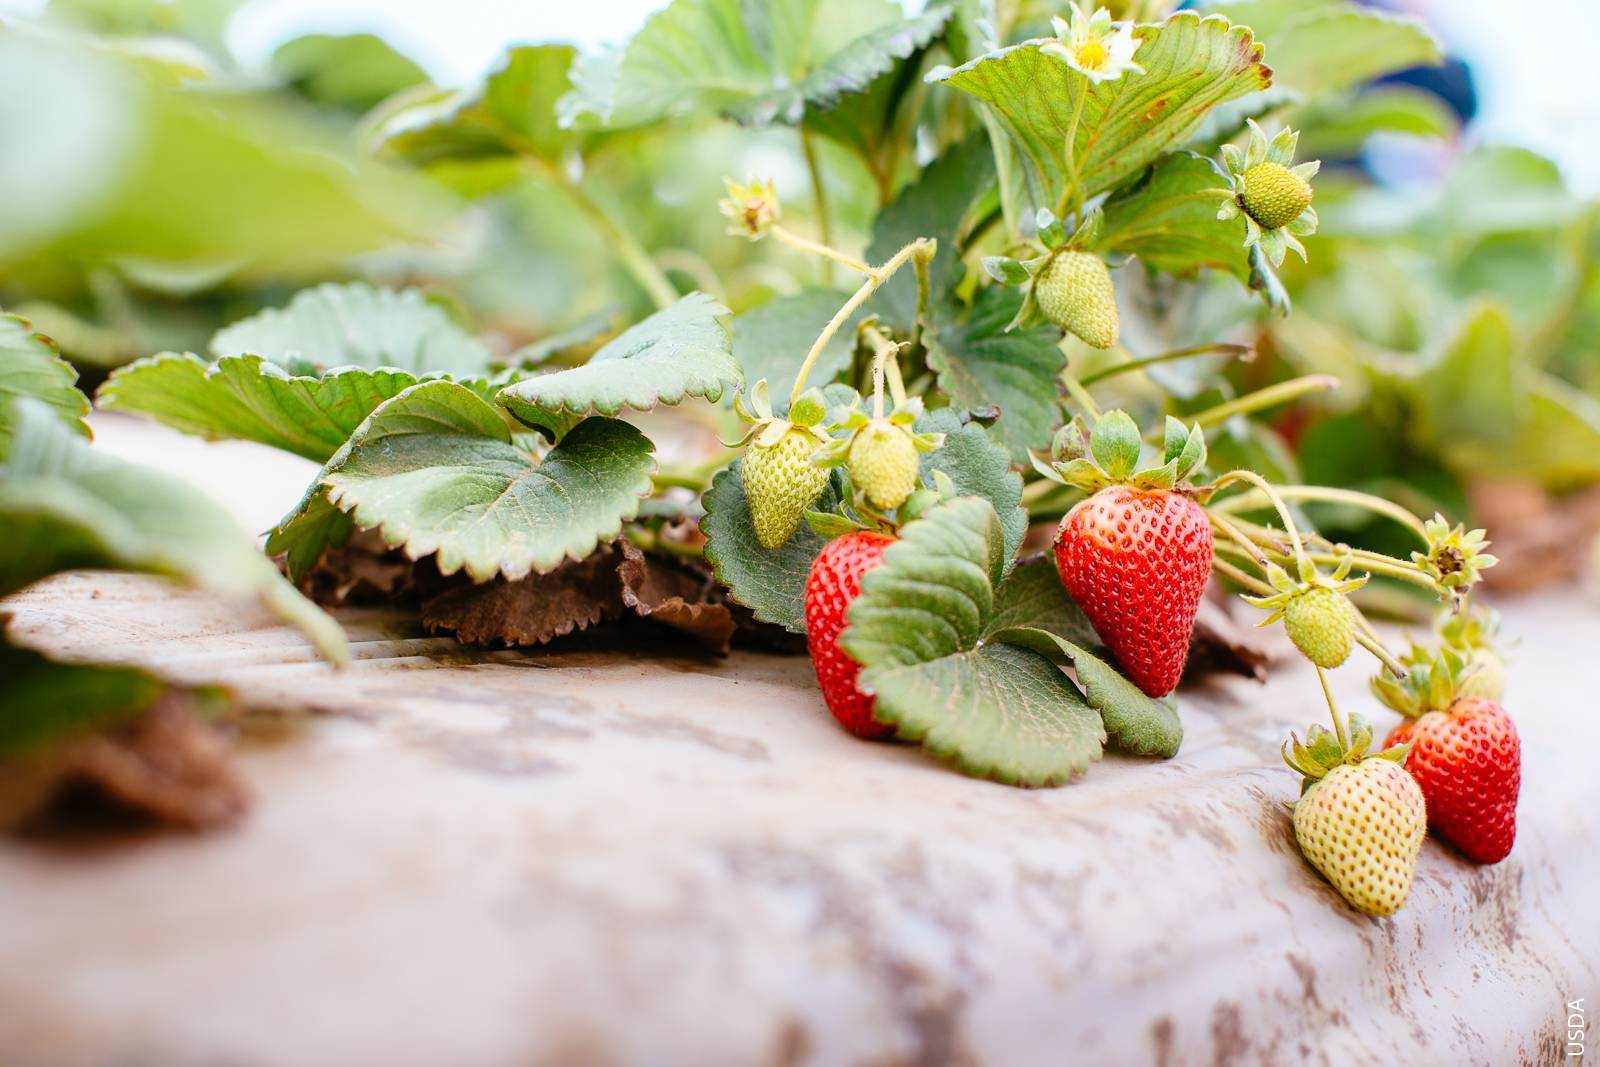 Strawberries account for roughly 70% of the chloropicrin applied annually in California, primarily on the Central Coast between Ventura and Santa Cruz counties.